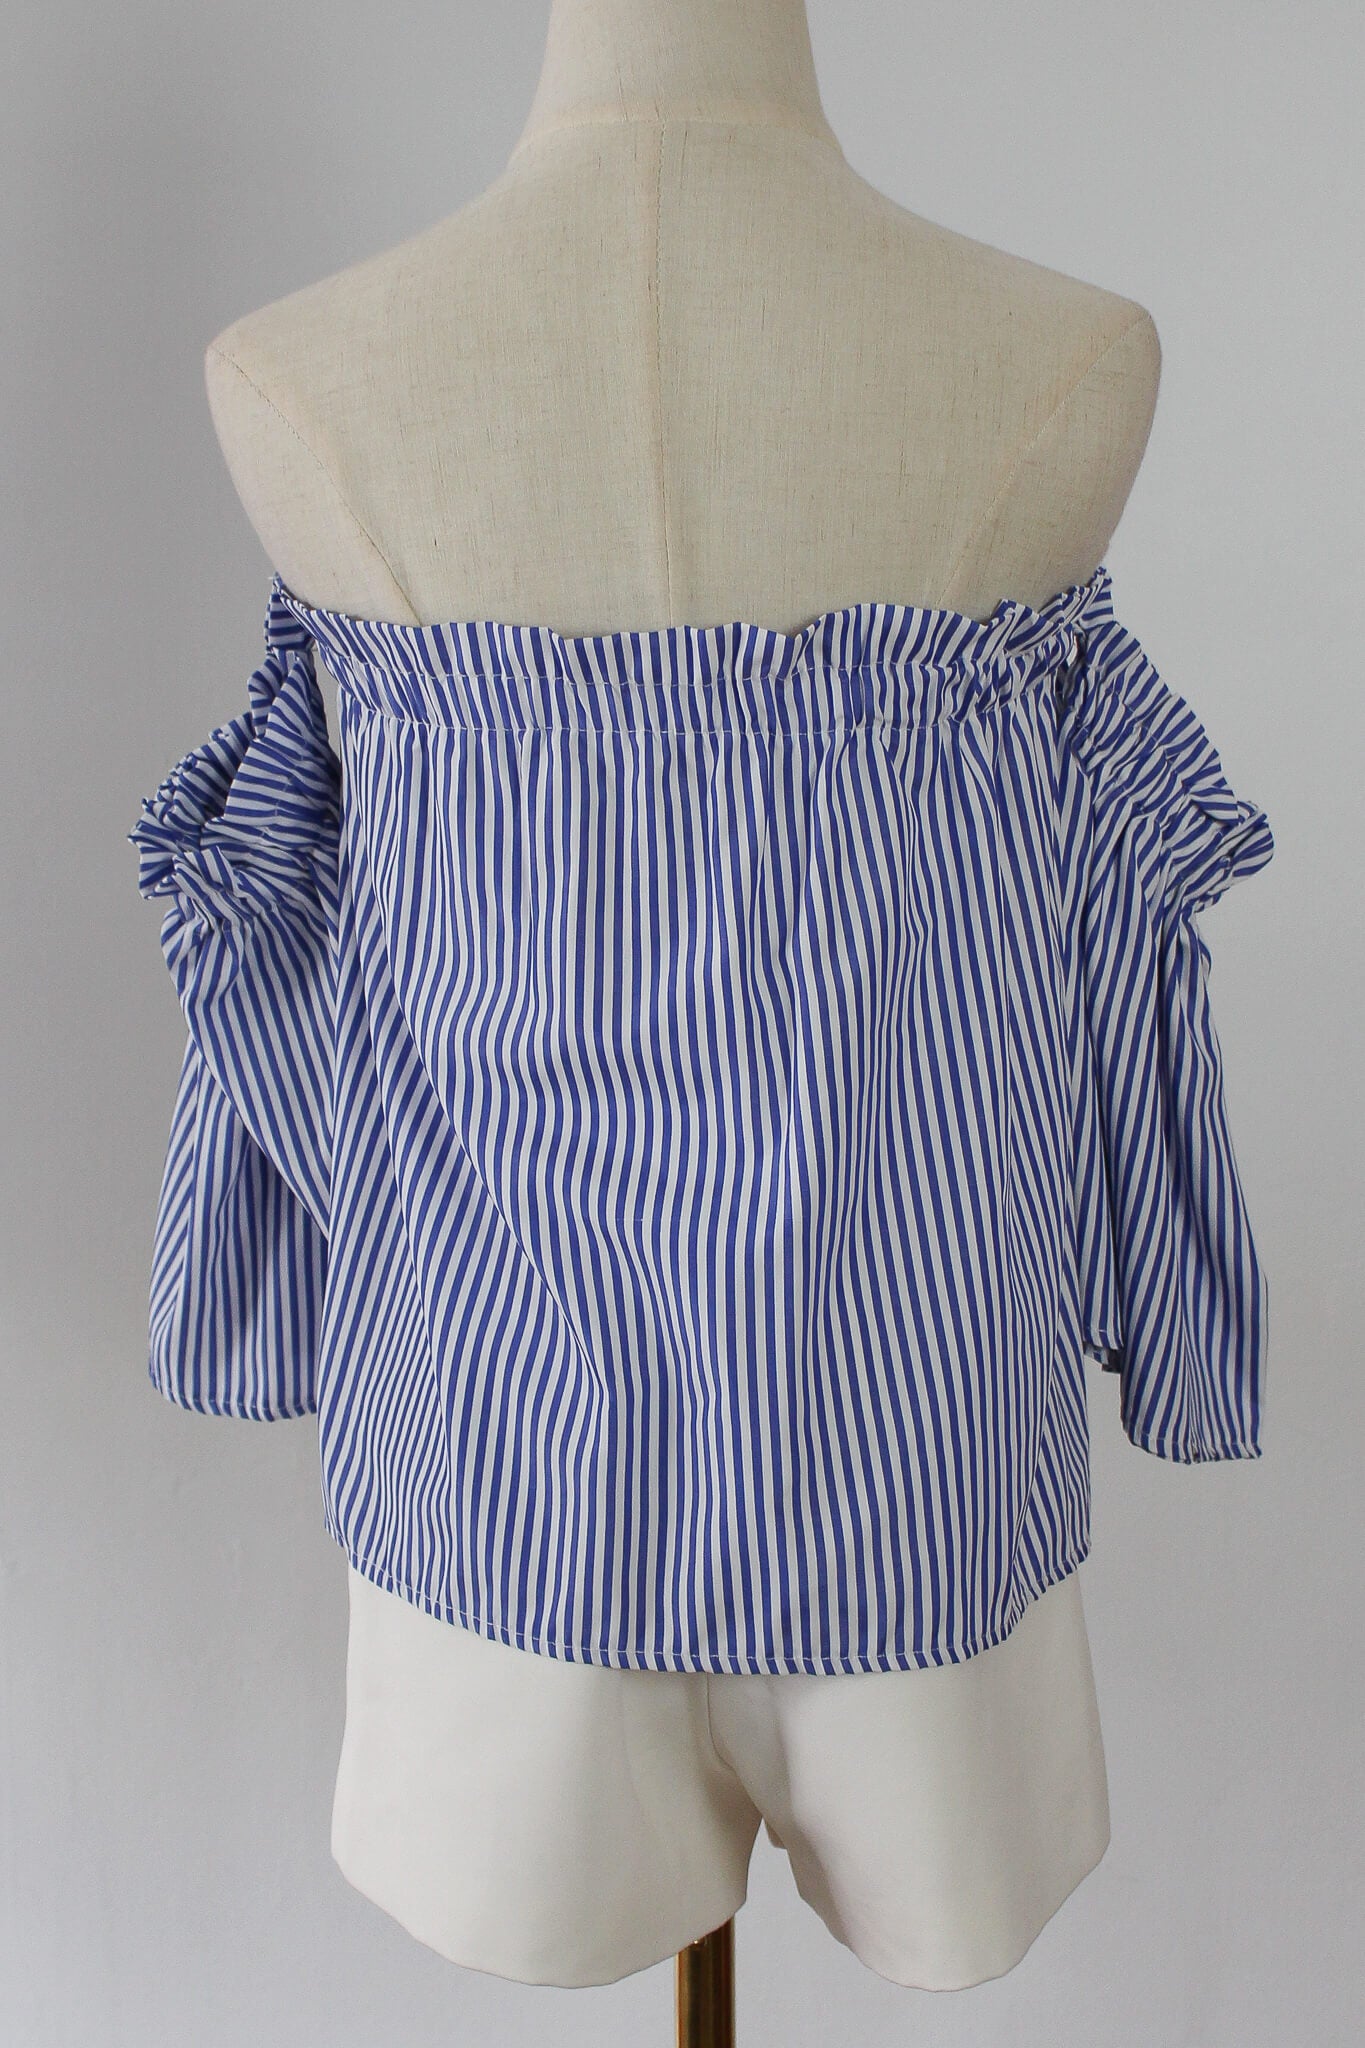 A blue and white striped off-shoulder top, perfect for the summer beach with nautical vibes. 